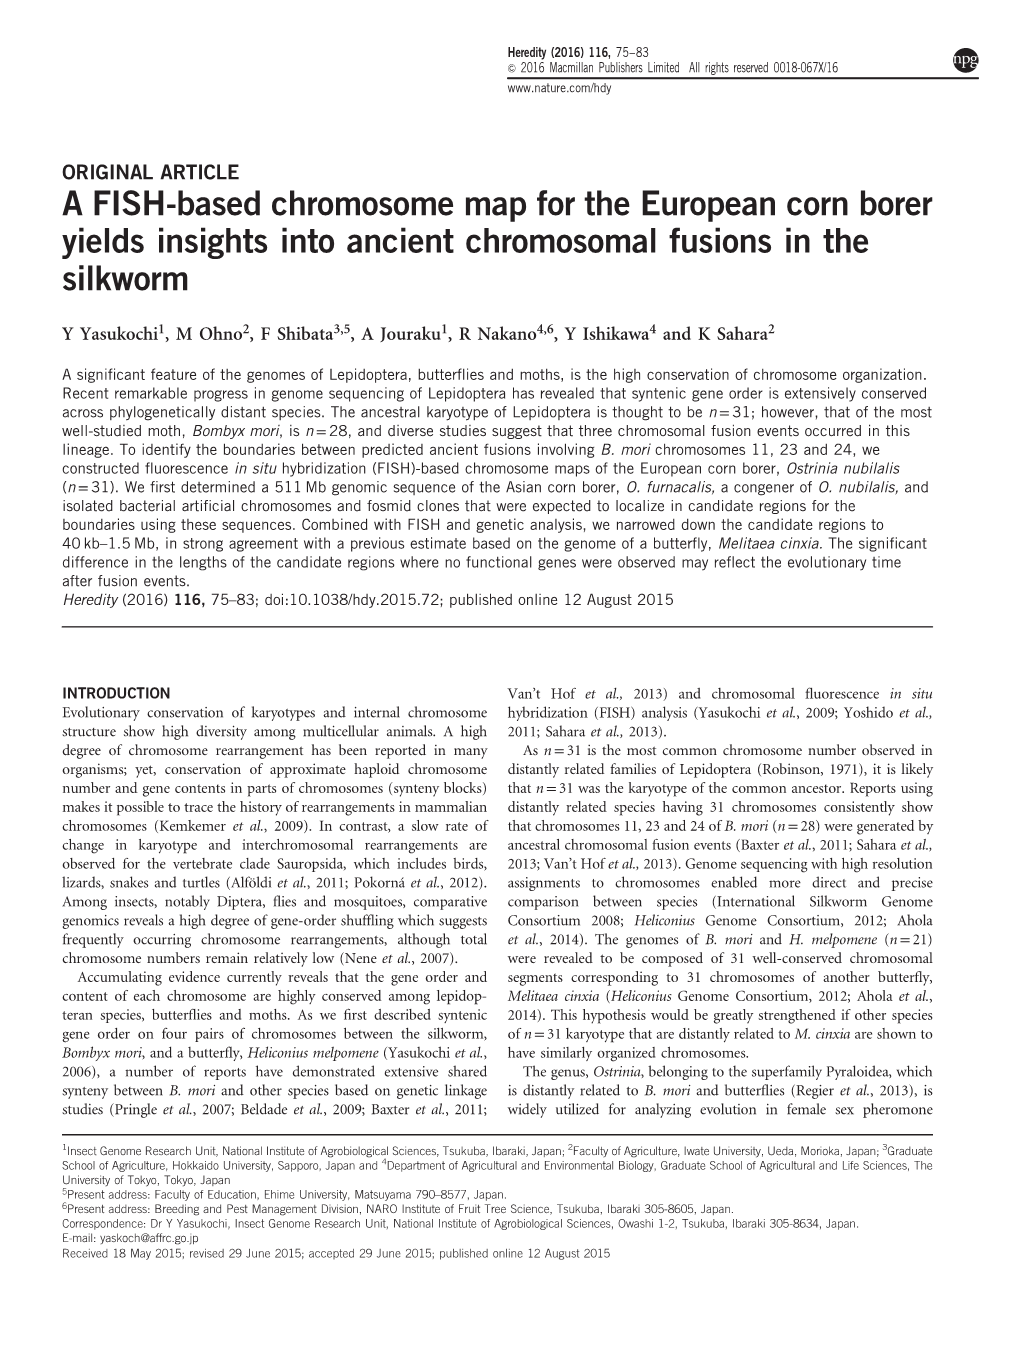 A FISH-Based Chromosome Map for the European Corn Borer Yields Insights Into Ancient Chromosomal Fusions in the Silkworm